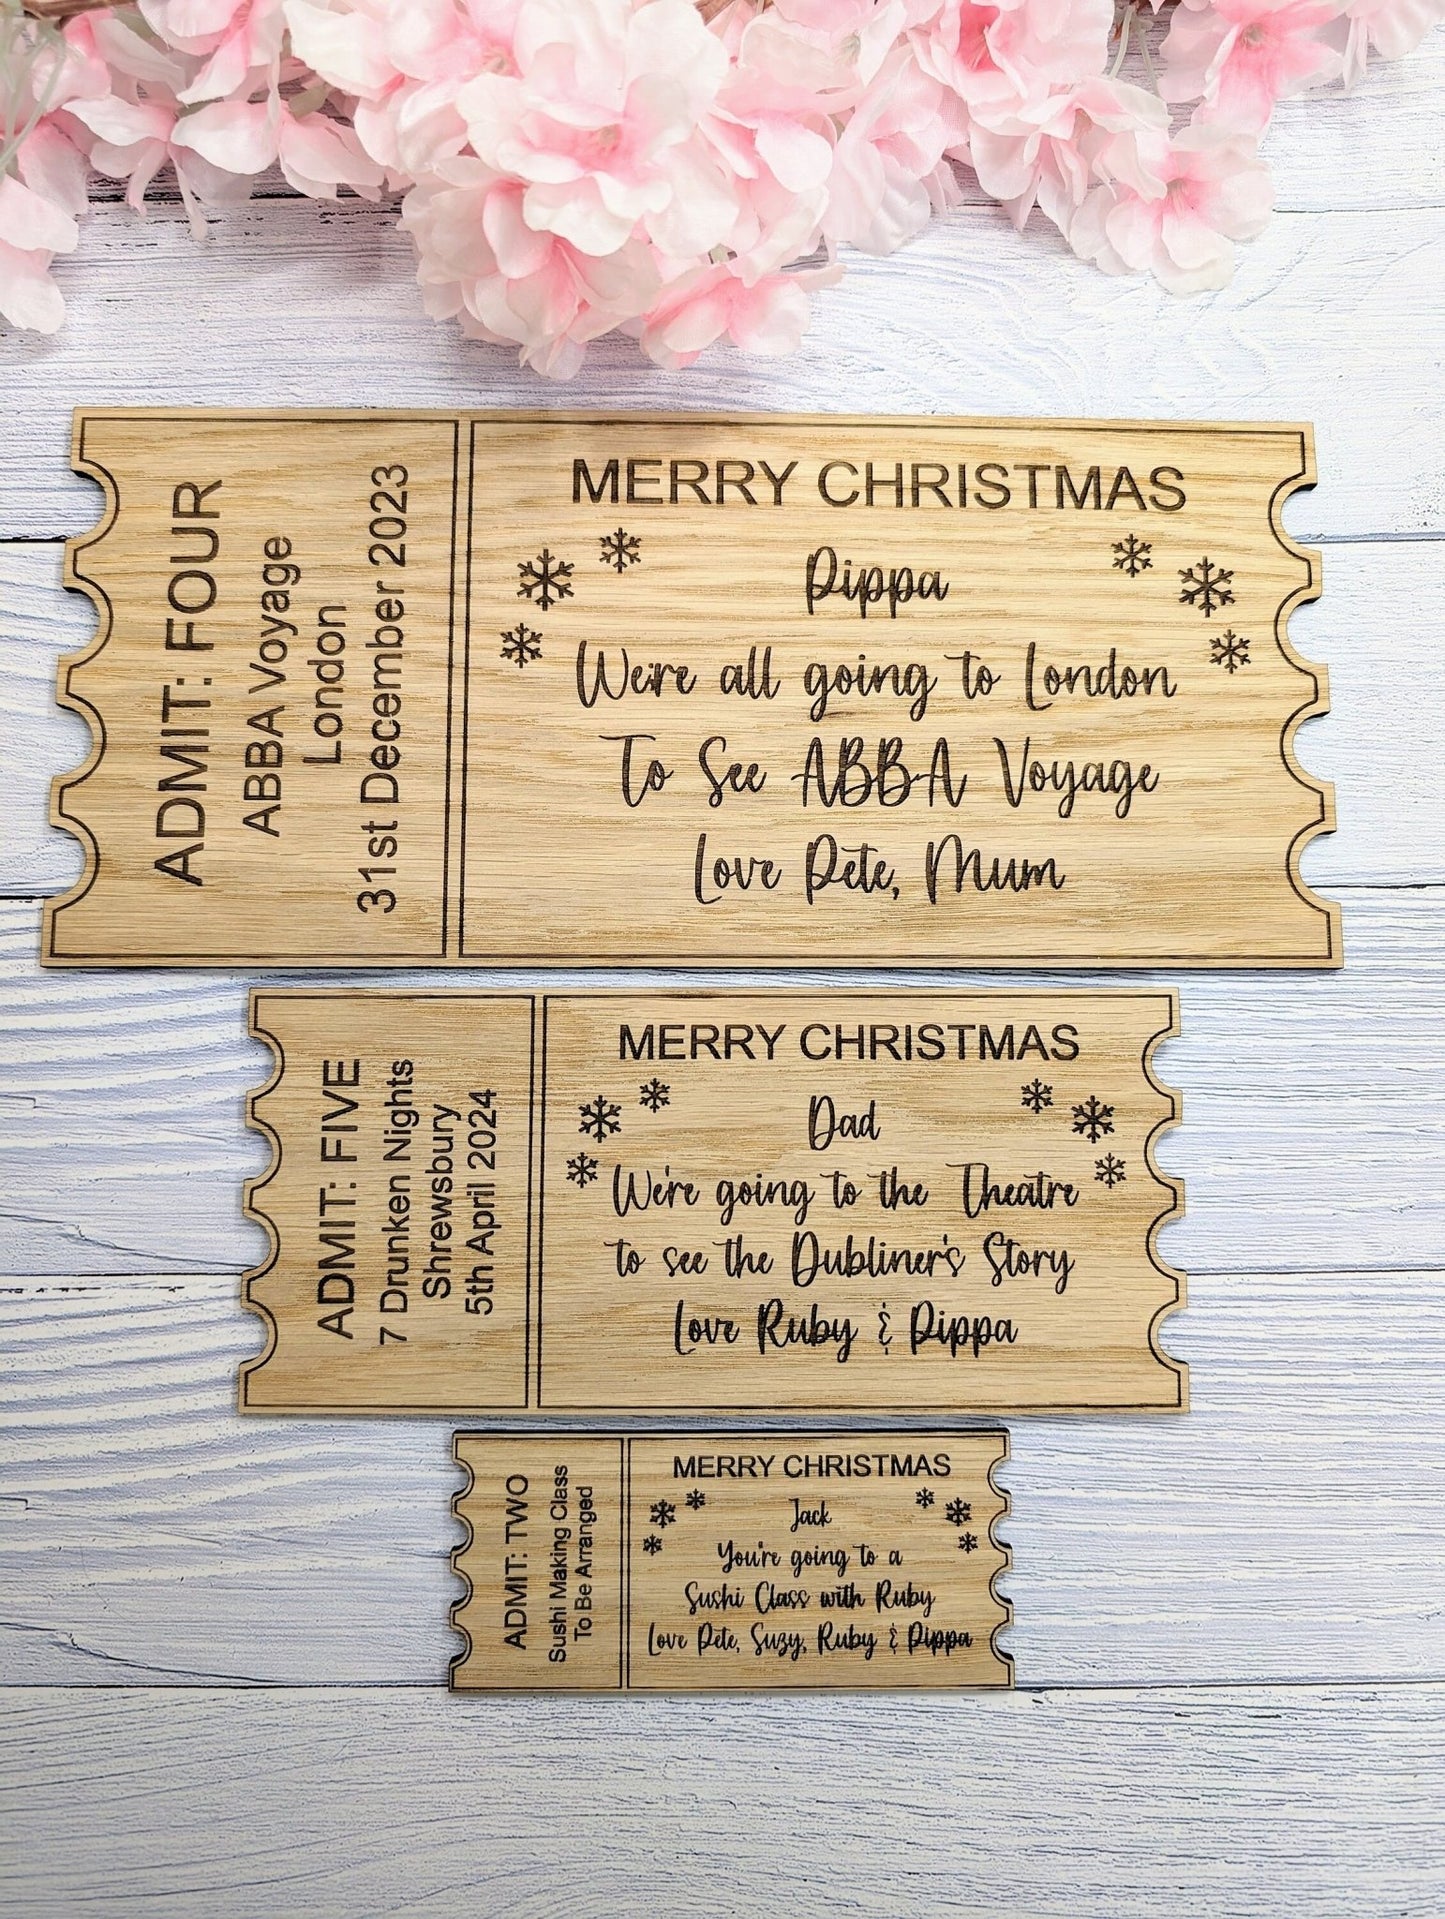 Personalised Christmas Magic Ticket in Oak Veneer - Custom Gift Experience Voucher - Memorable Keepsake for Special Occasions | 3 Sizes - CherryGroveCraft